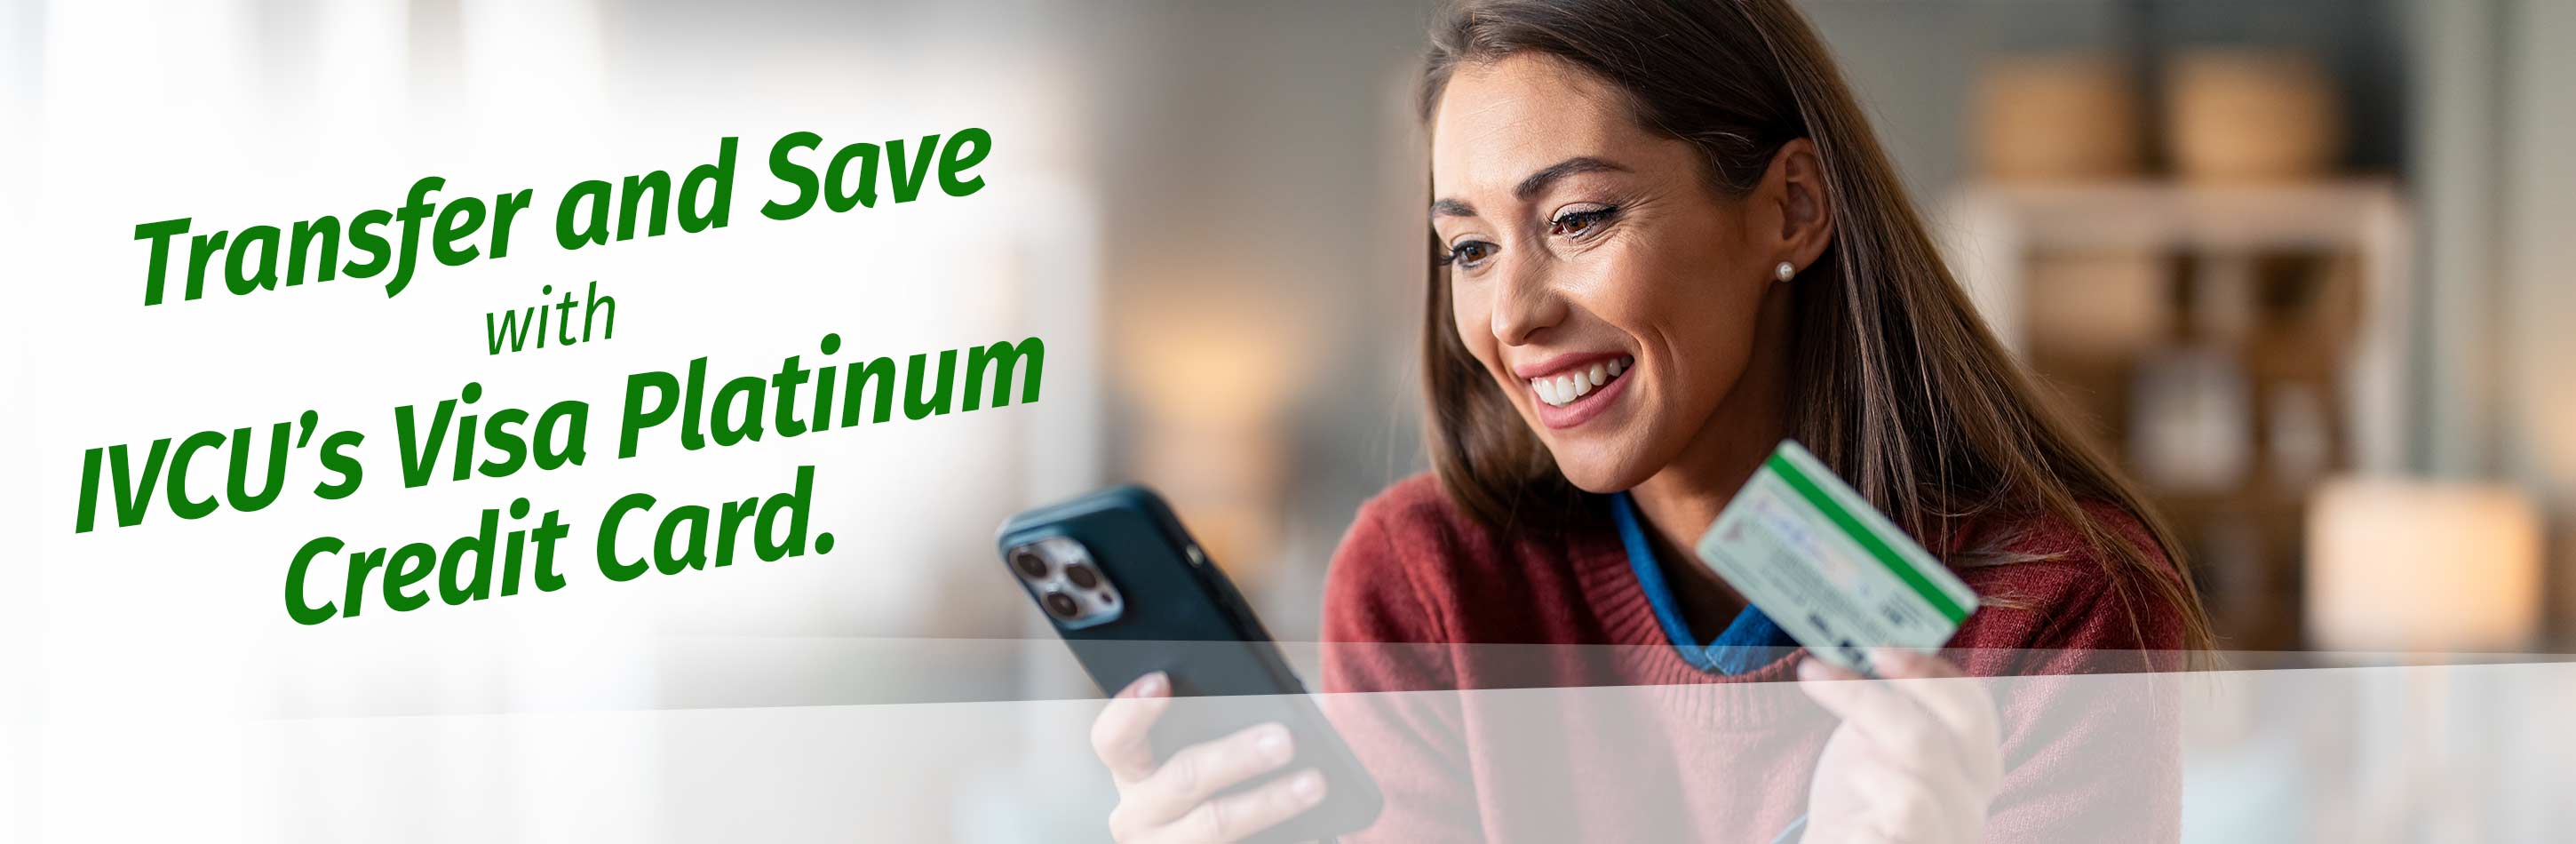 Transfer and Save with IVCU’s Visa Platinum Credit Card.